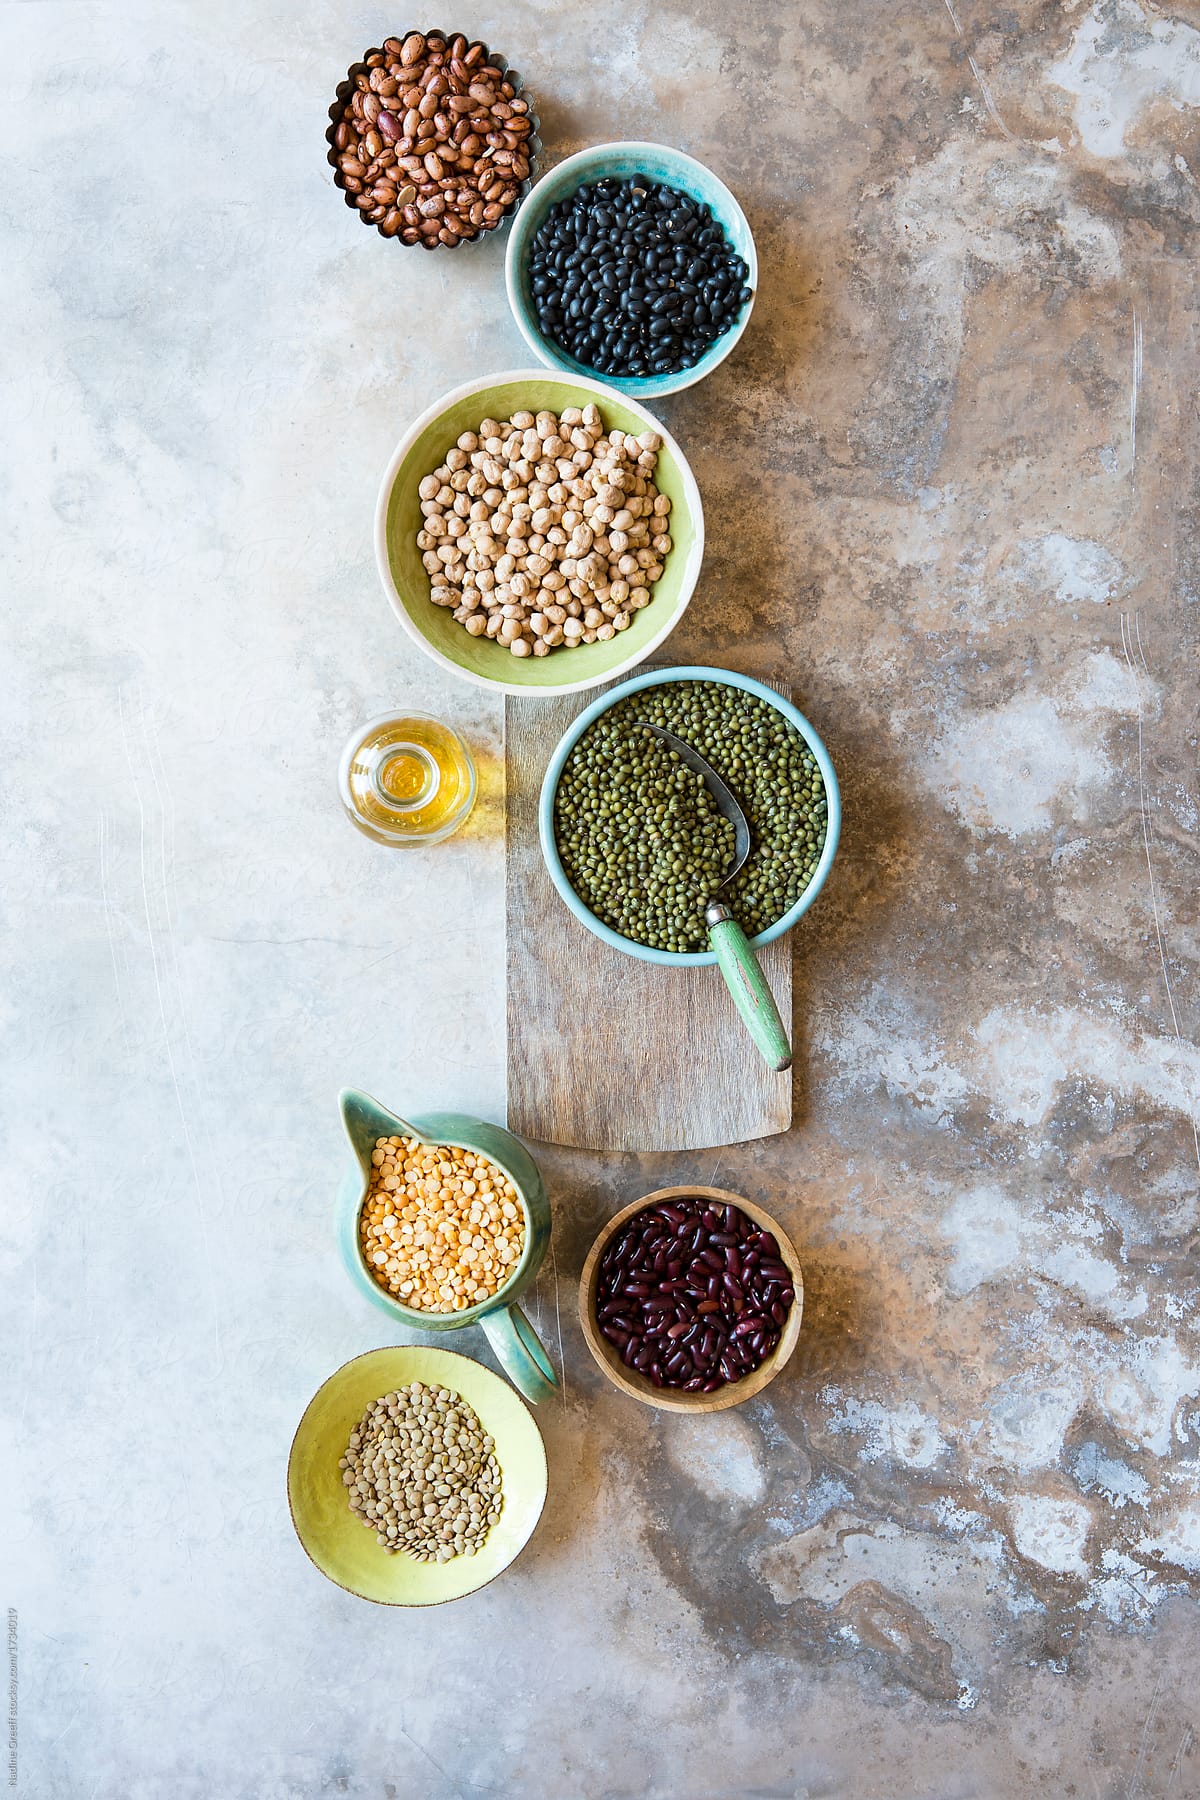 Assortment of dried beans and lentils